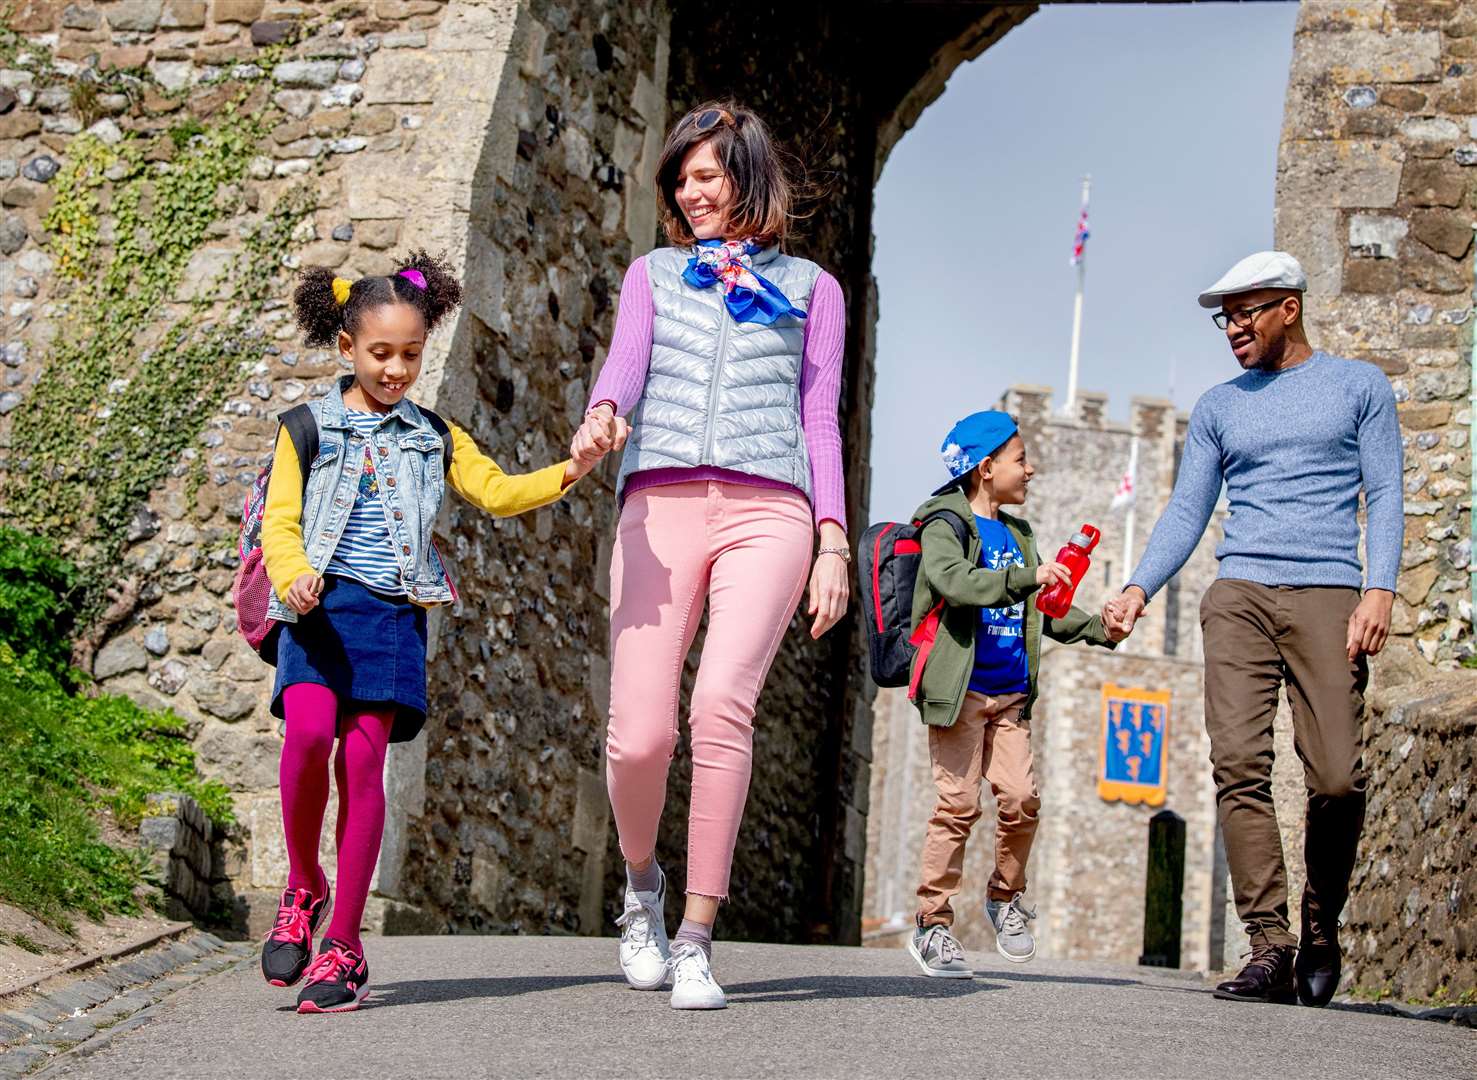 Free attraction tickets are available next month for great days out. Picture: English Heritage.